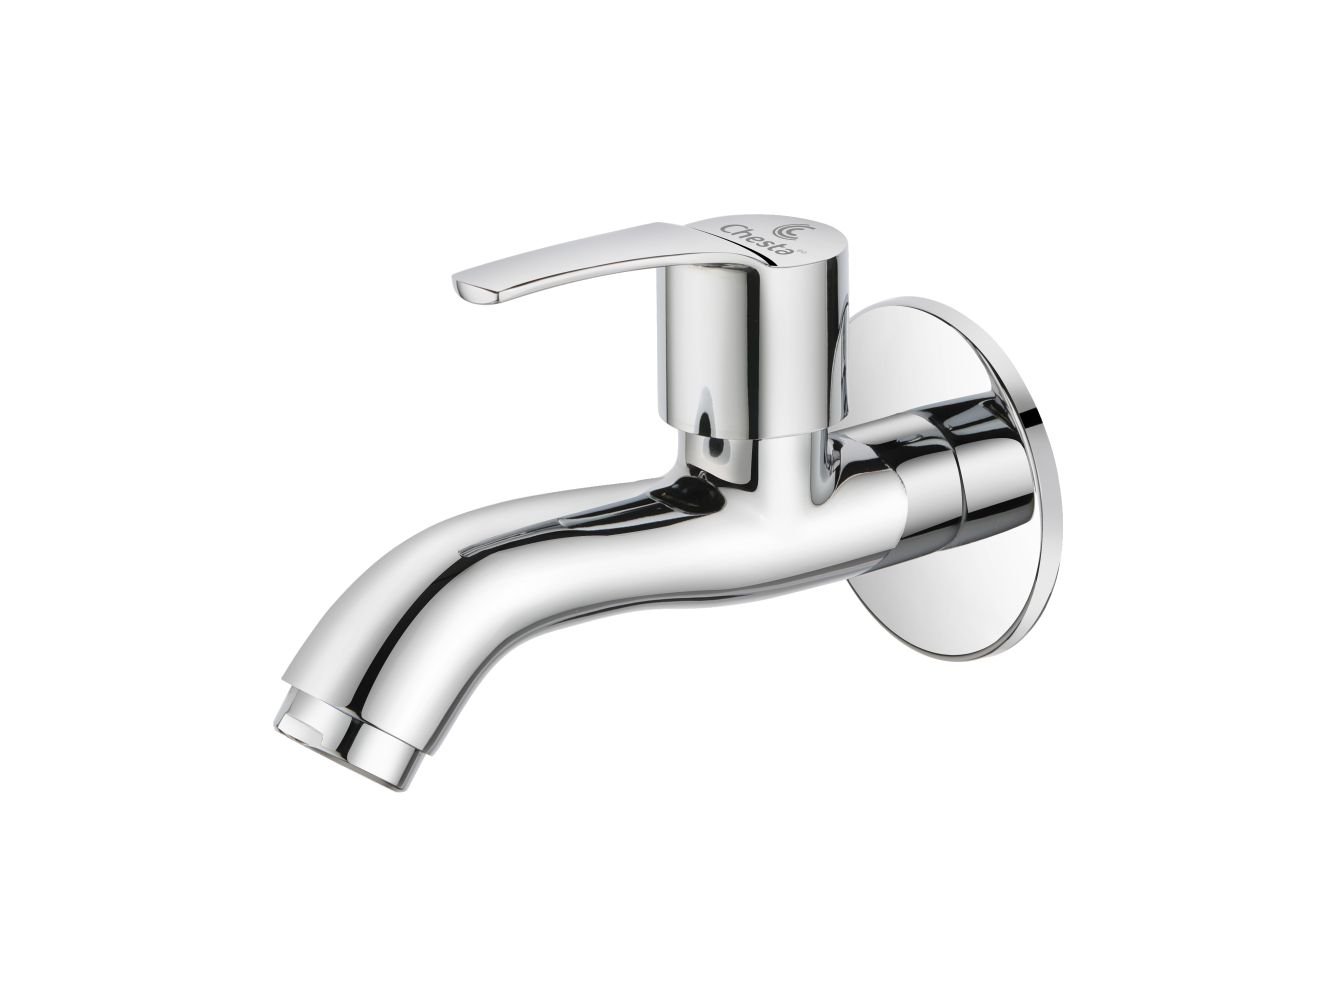 ST - 1002 - Long Body with Wall Flange at Chesta Bath Fittings